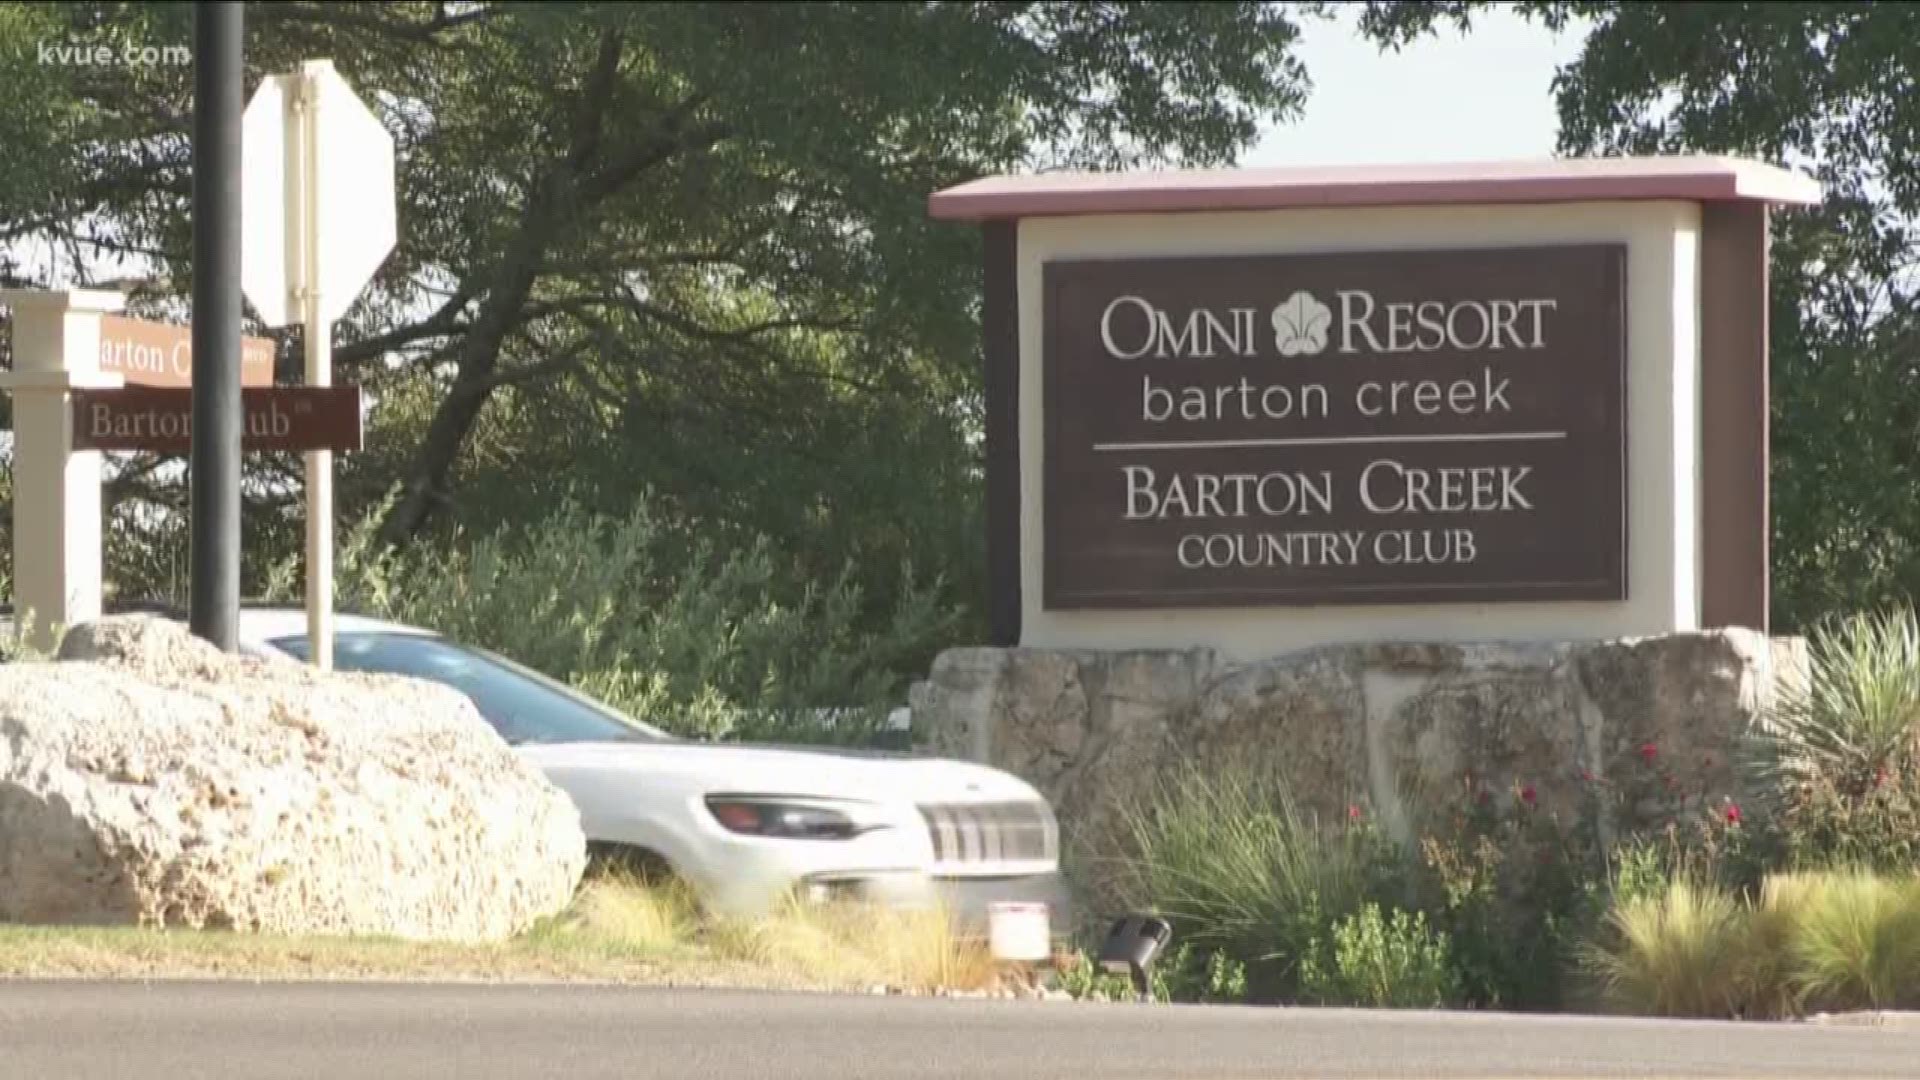 An Austin woman is suing Omni Hotels, claiming she was let go because she was pregnant.